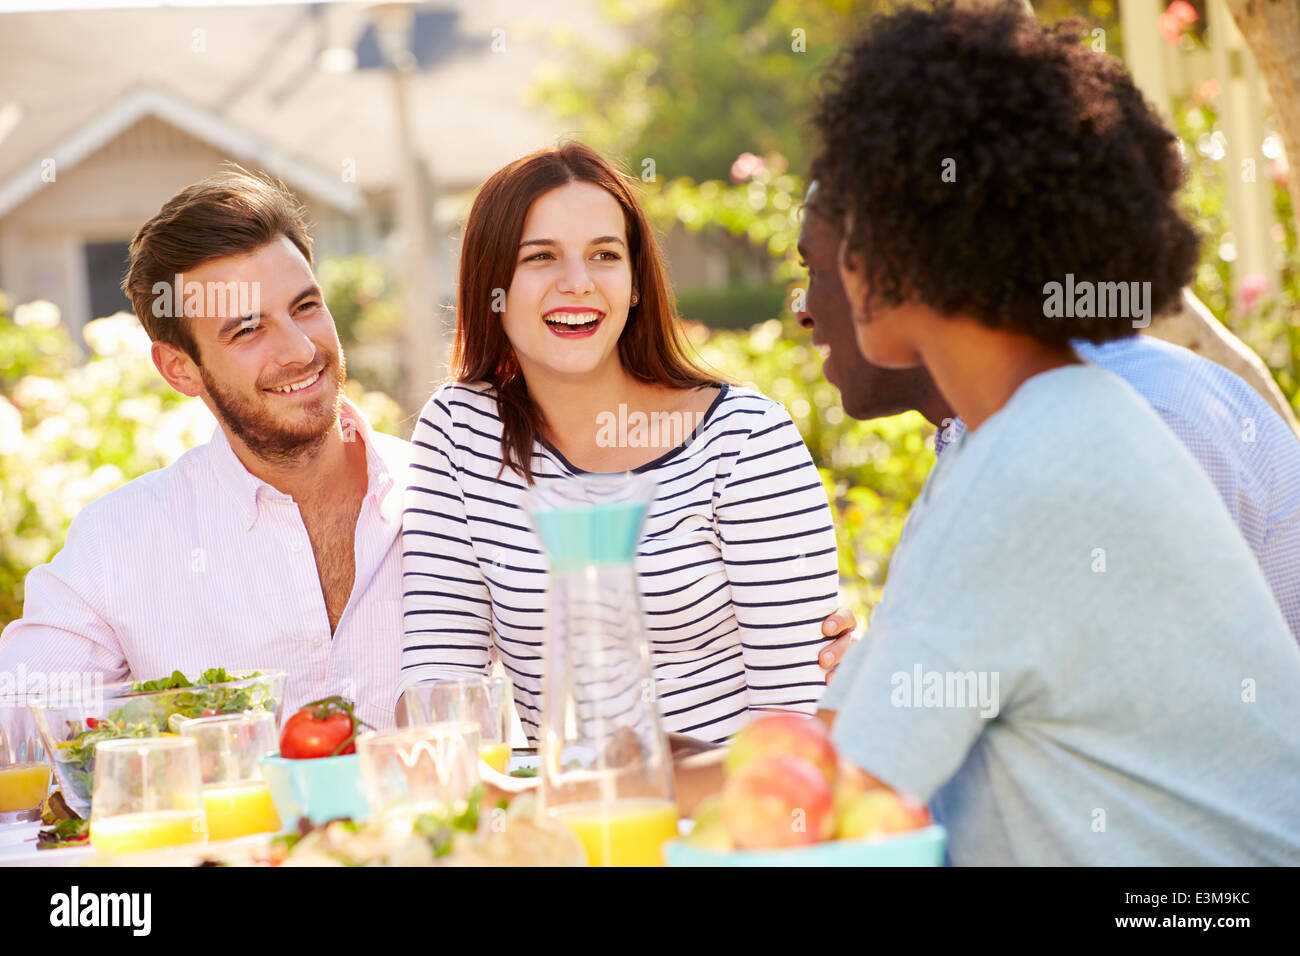 Group Of Friends Enjoying Meal At Outdoor Party In Back Yard Stock Photo